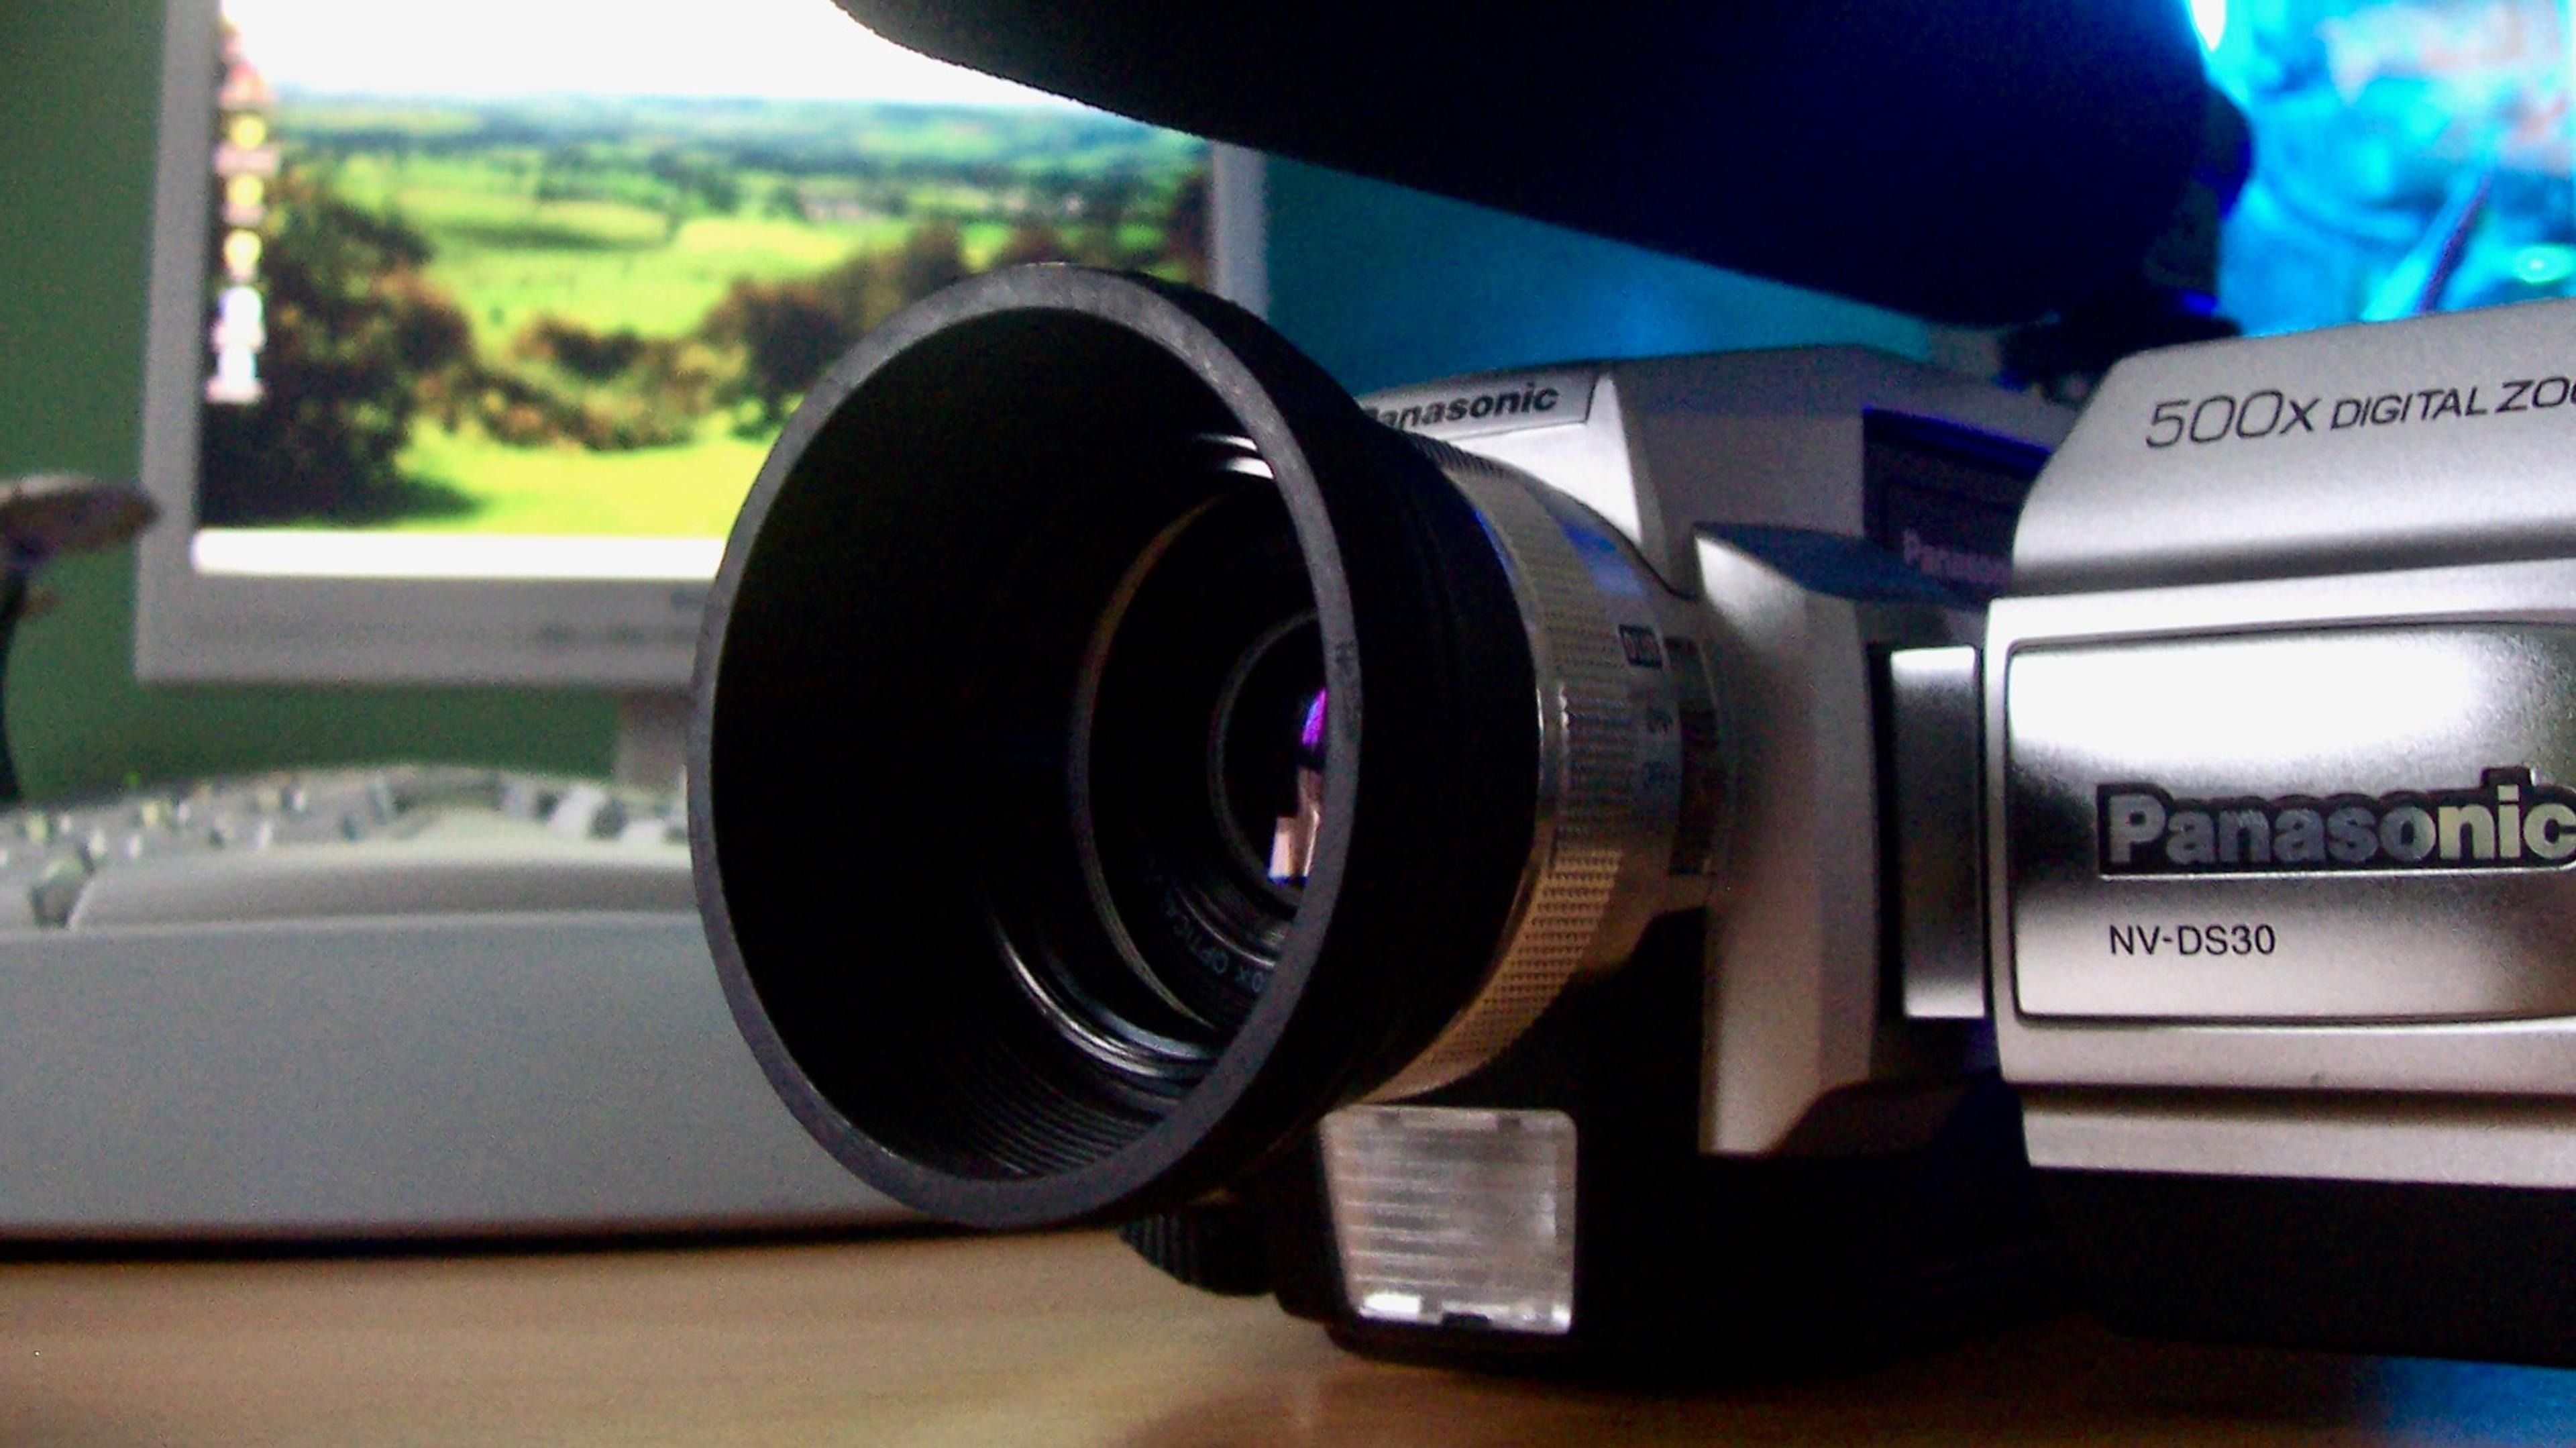 A Panasonic camcorder photographed in front of an early 2000s computer